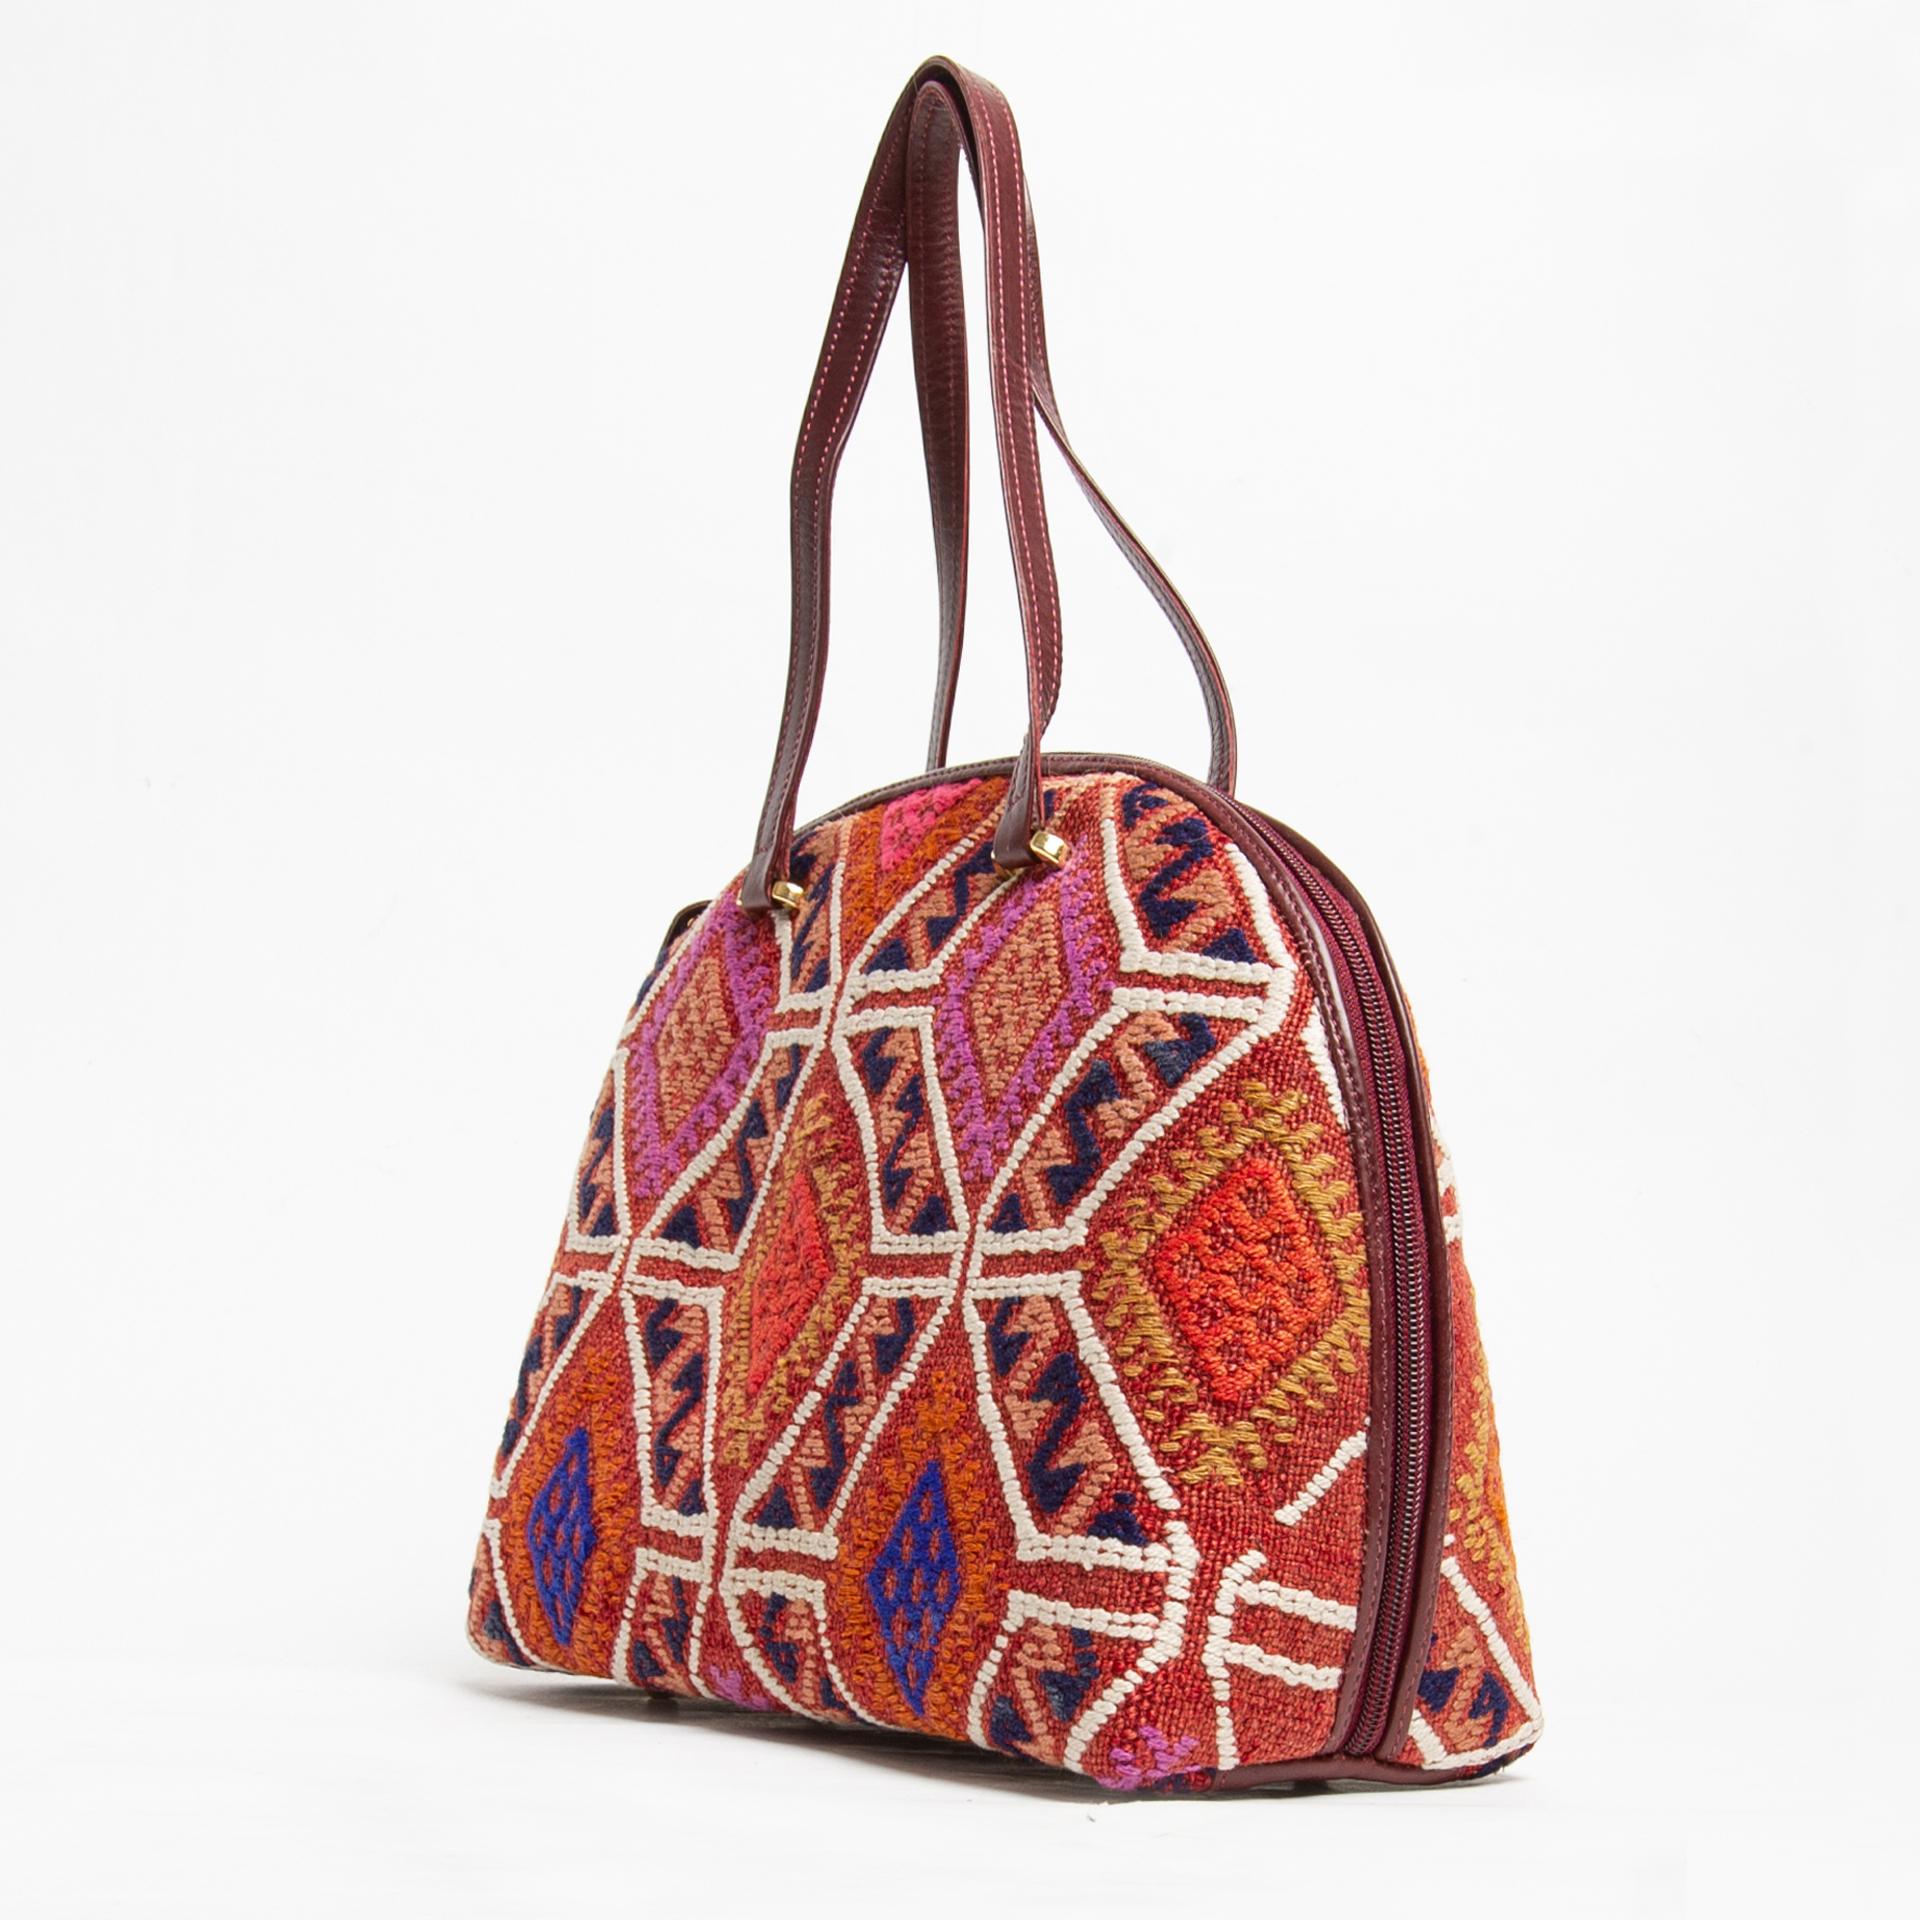 Elegant and comfortable handcrafted bag, with an oriental kilim and leather finishes.
Perfect inside too.  Never used.
Unique piece of Italian artisanal manufacturing.